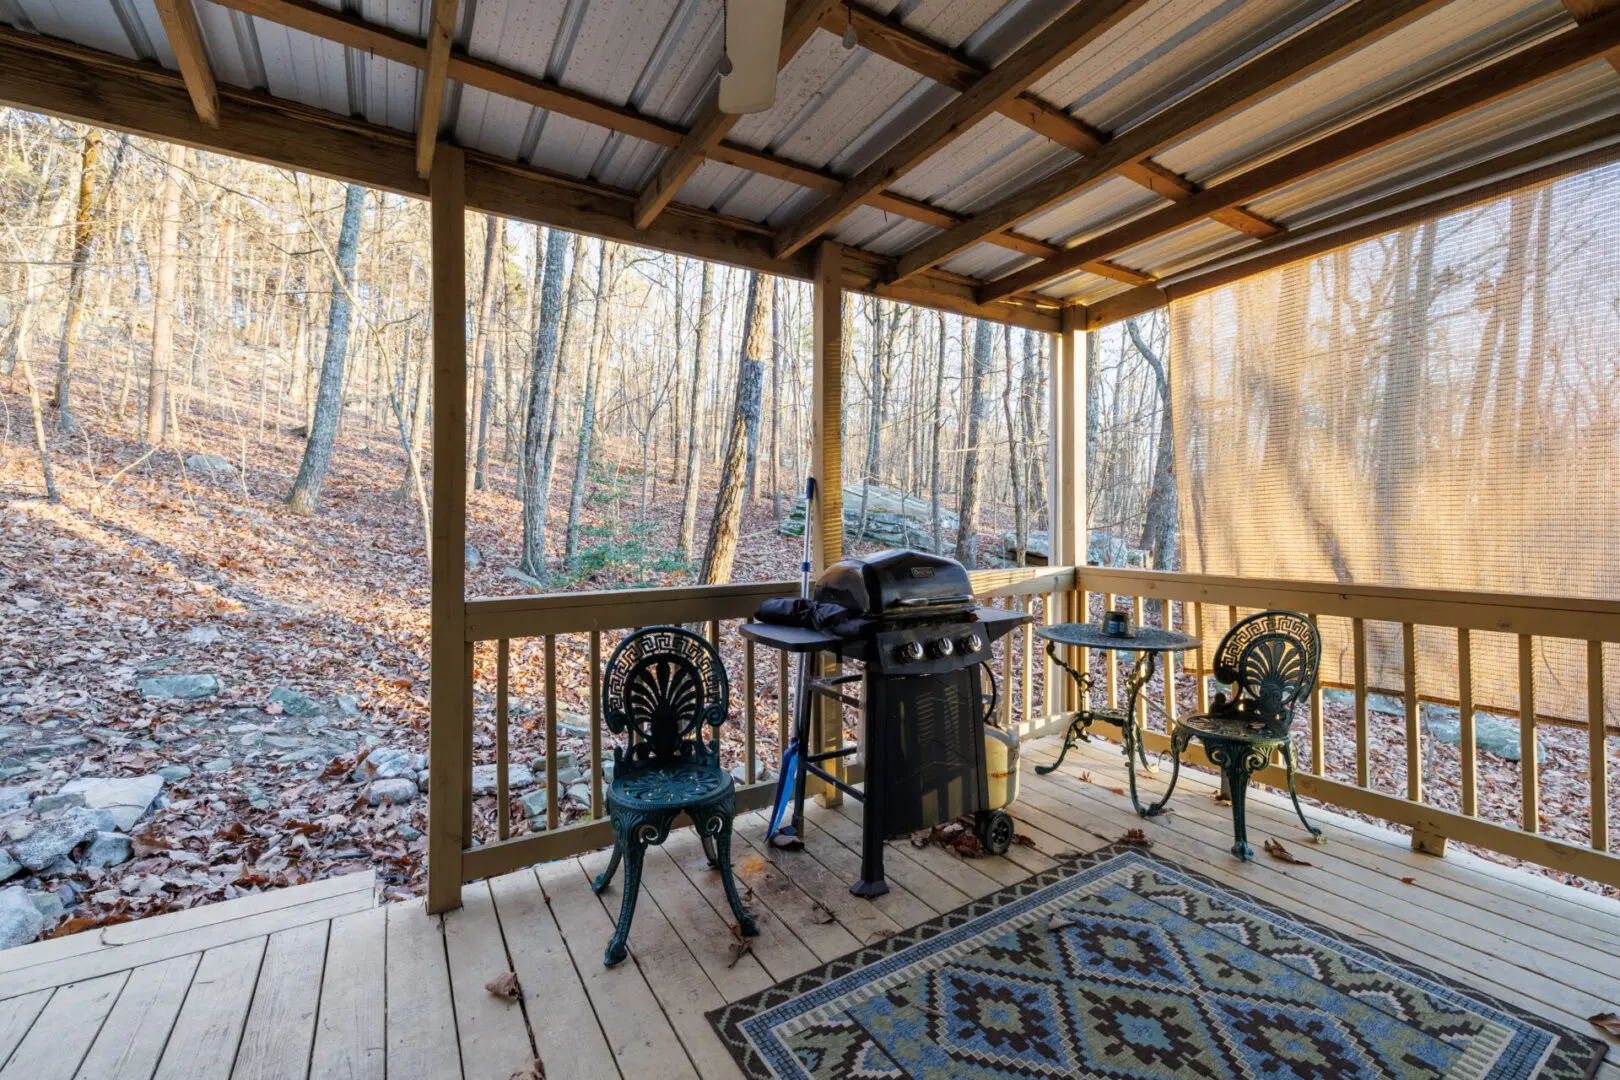 Vacation spot featuring a screened in porch with a grill and chairs.